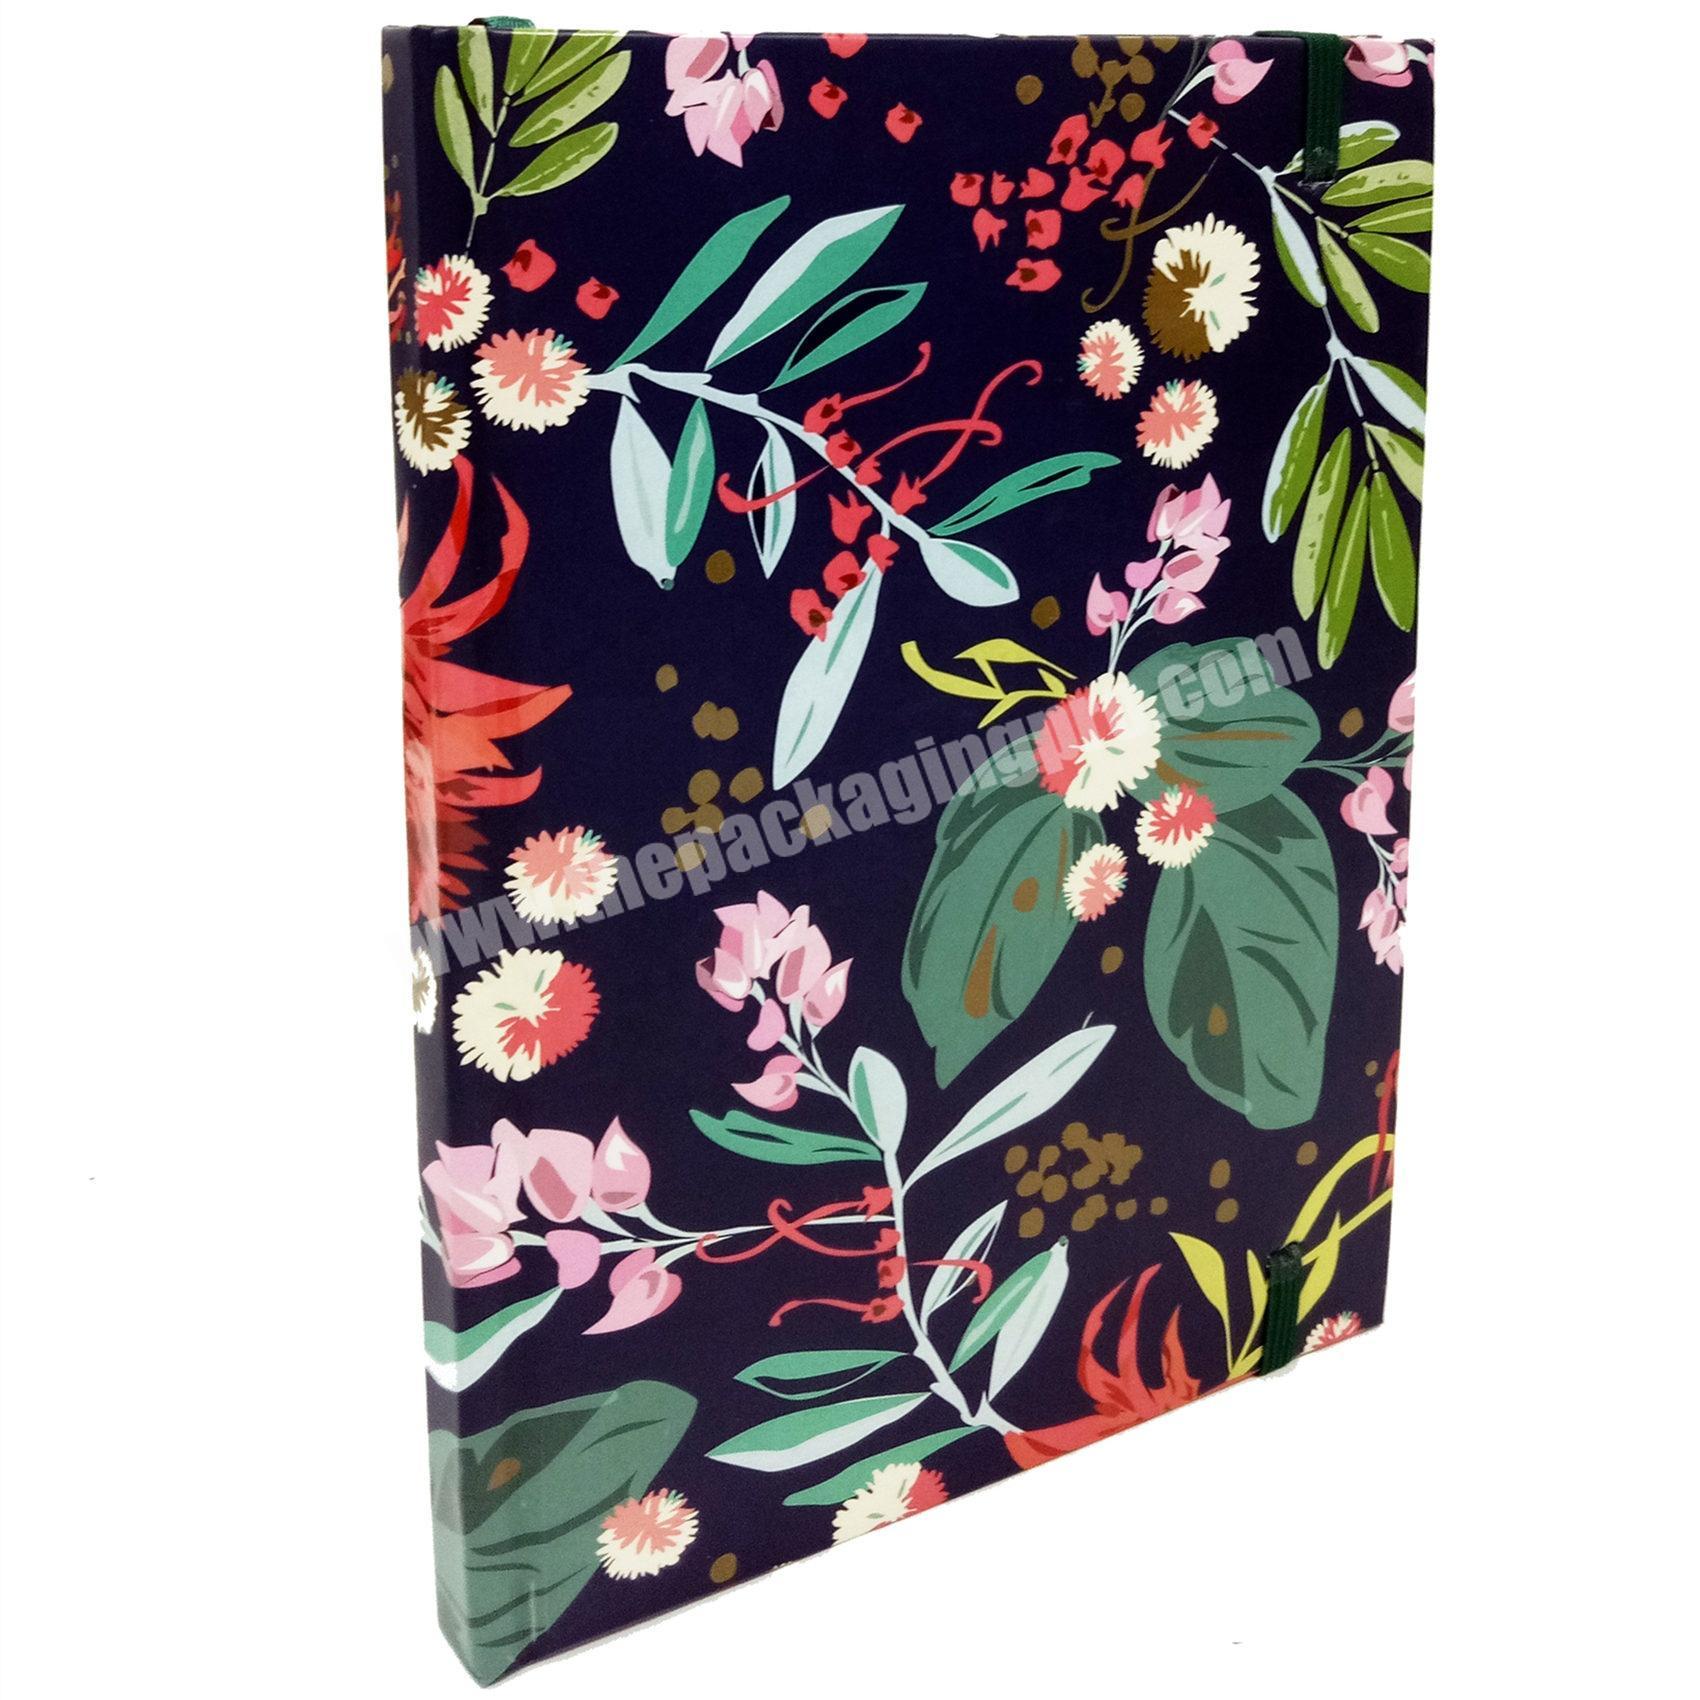 2020 New Paper Cover Diary Hardcover Elastic Band Notebook Blank Pages Planner